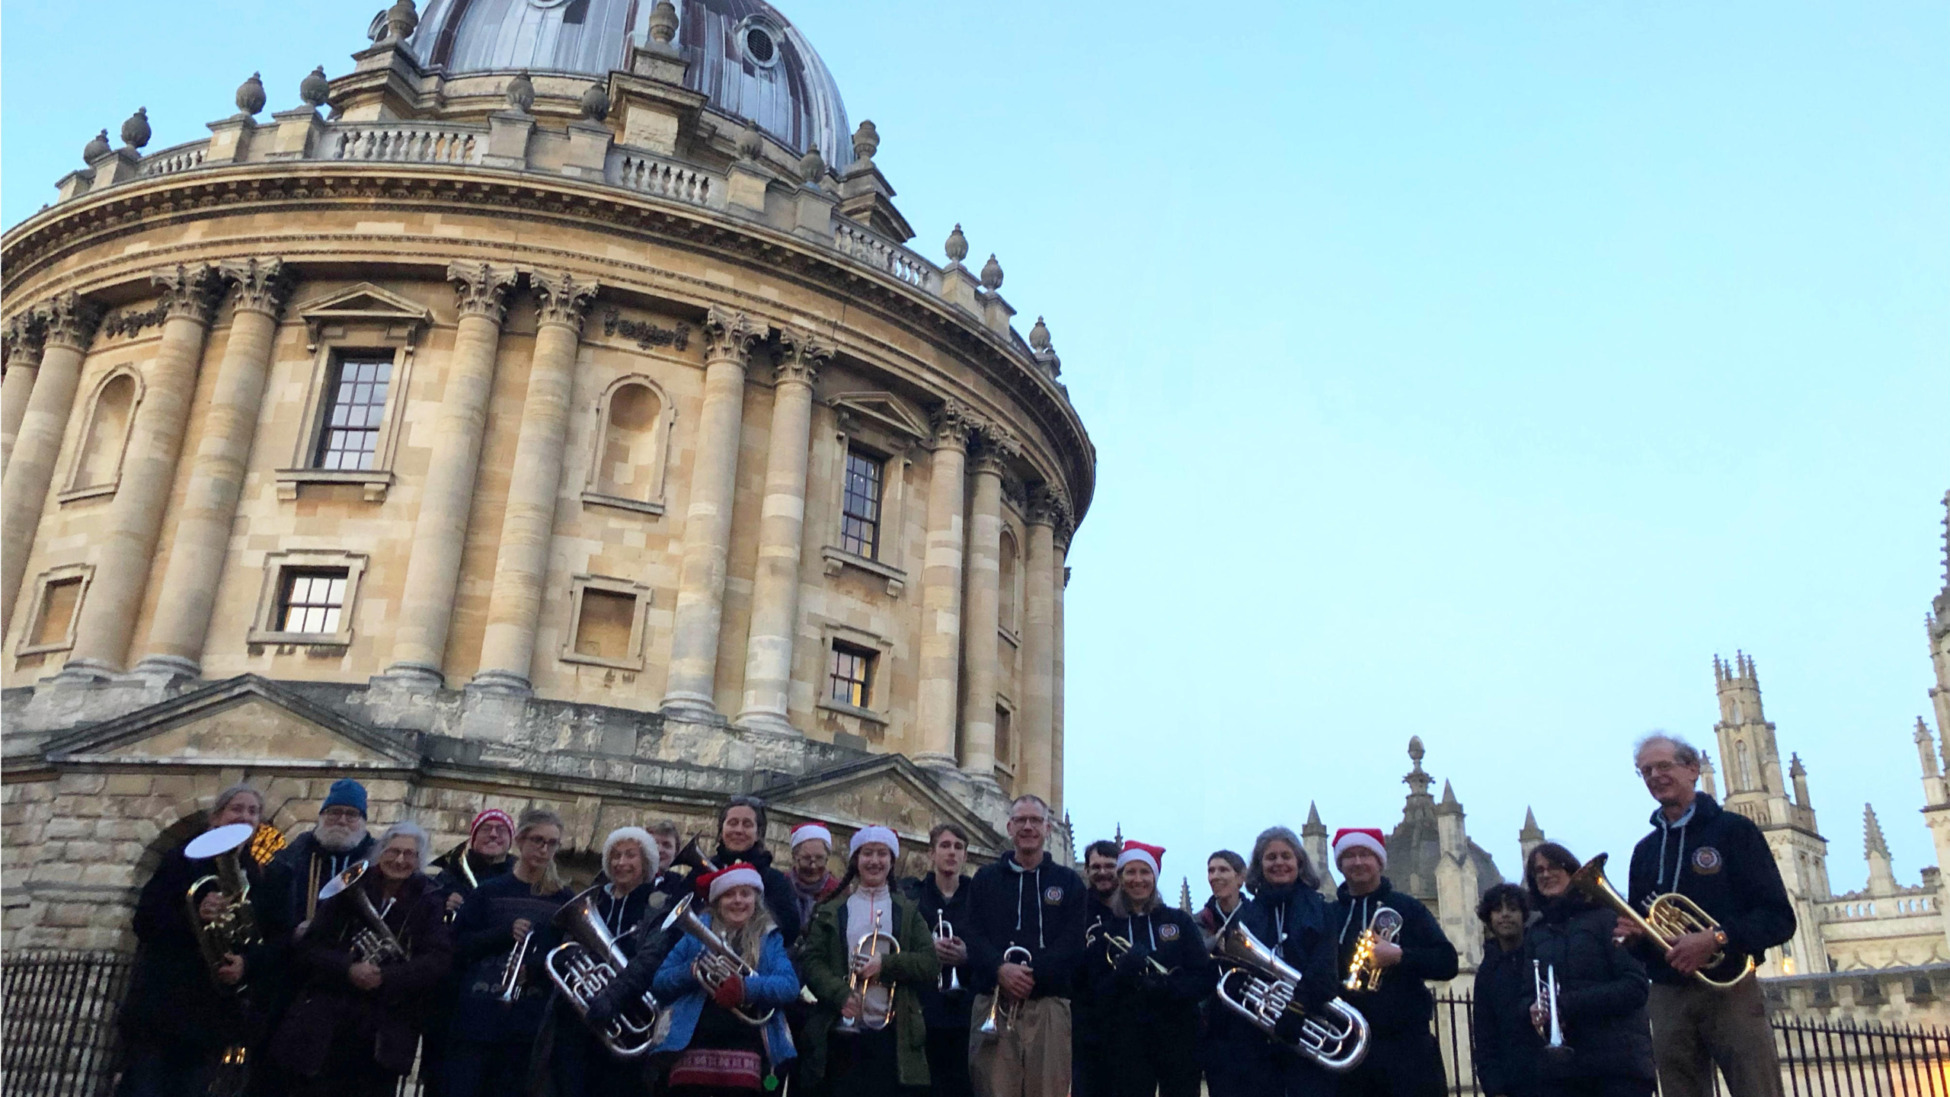 Band by Radcliffe Camera